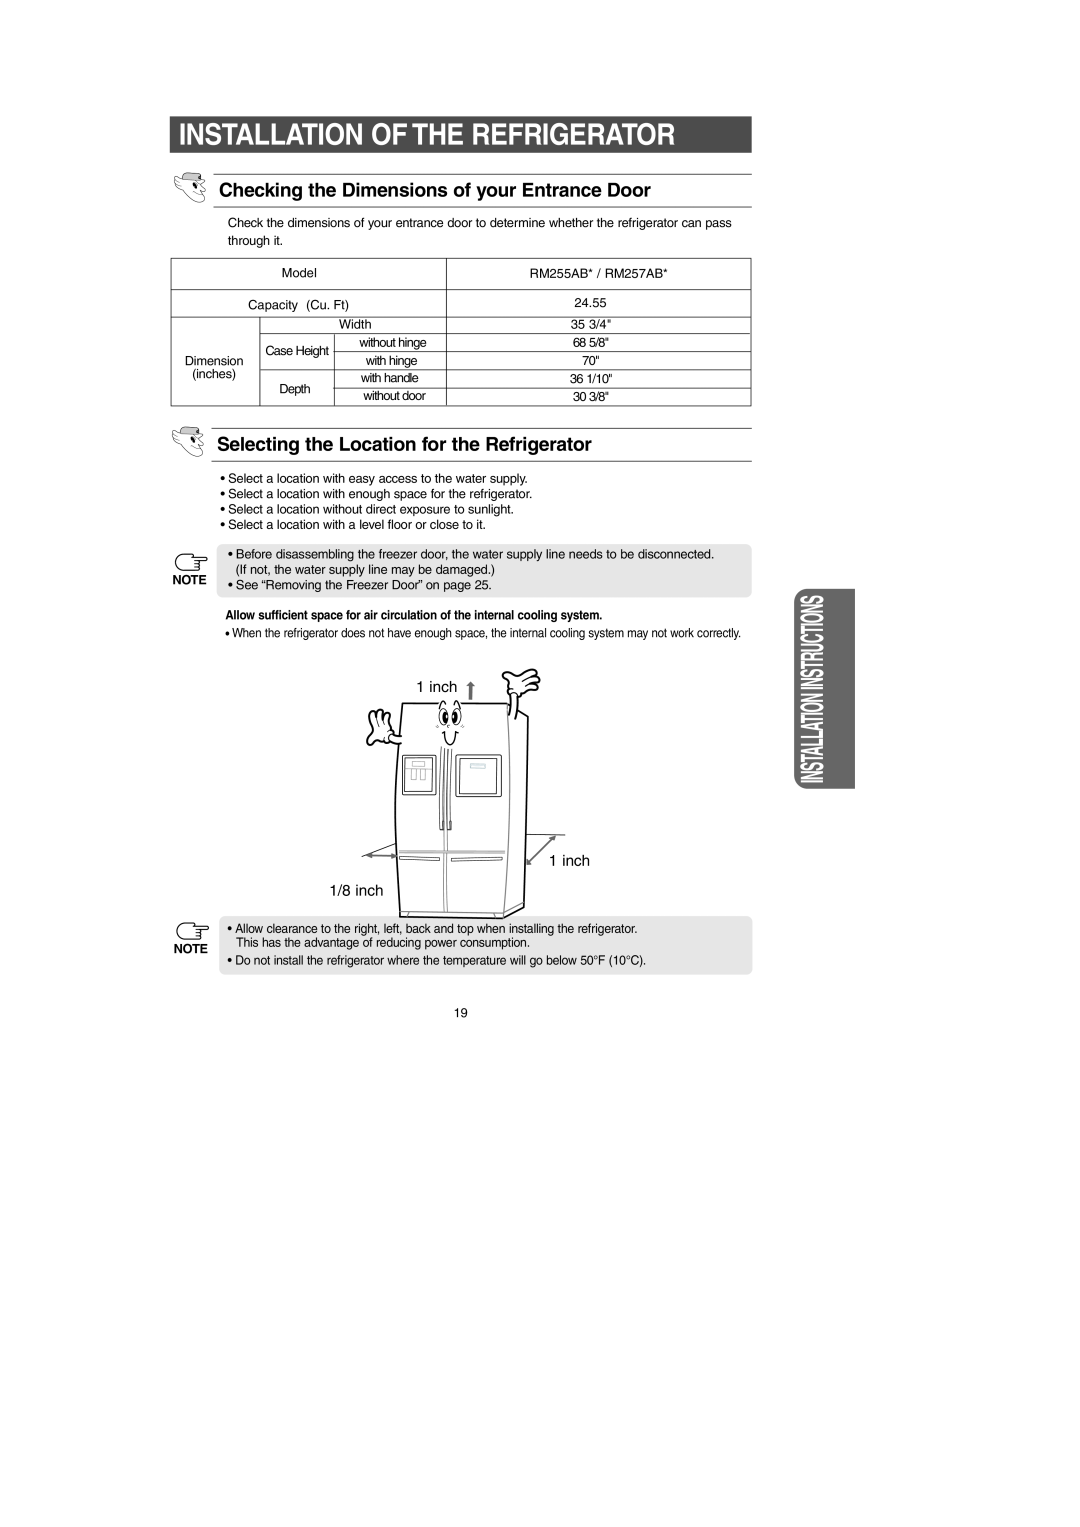 Samsung RM257AB*, RM255AB* Installation Of The Refrigerator, Checking the Dimensions of your Entrance Door, 1/8 inch 